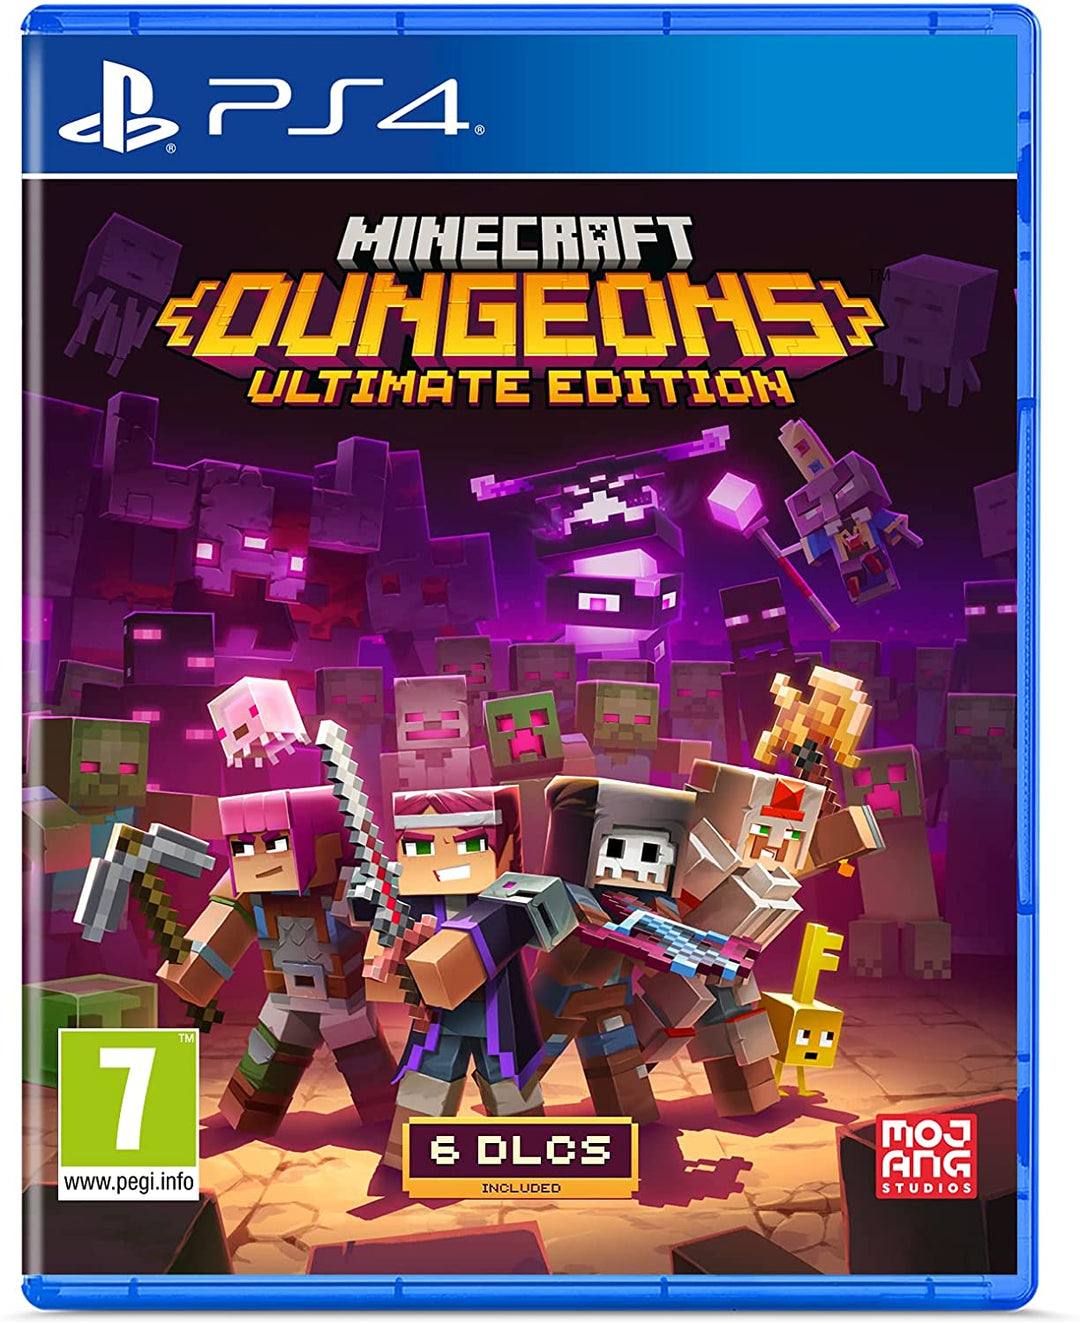 Minecraft Dungeons - Ultimate Edition (PS4)